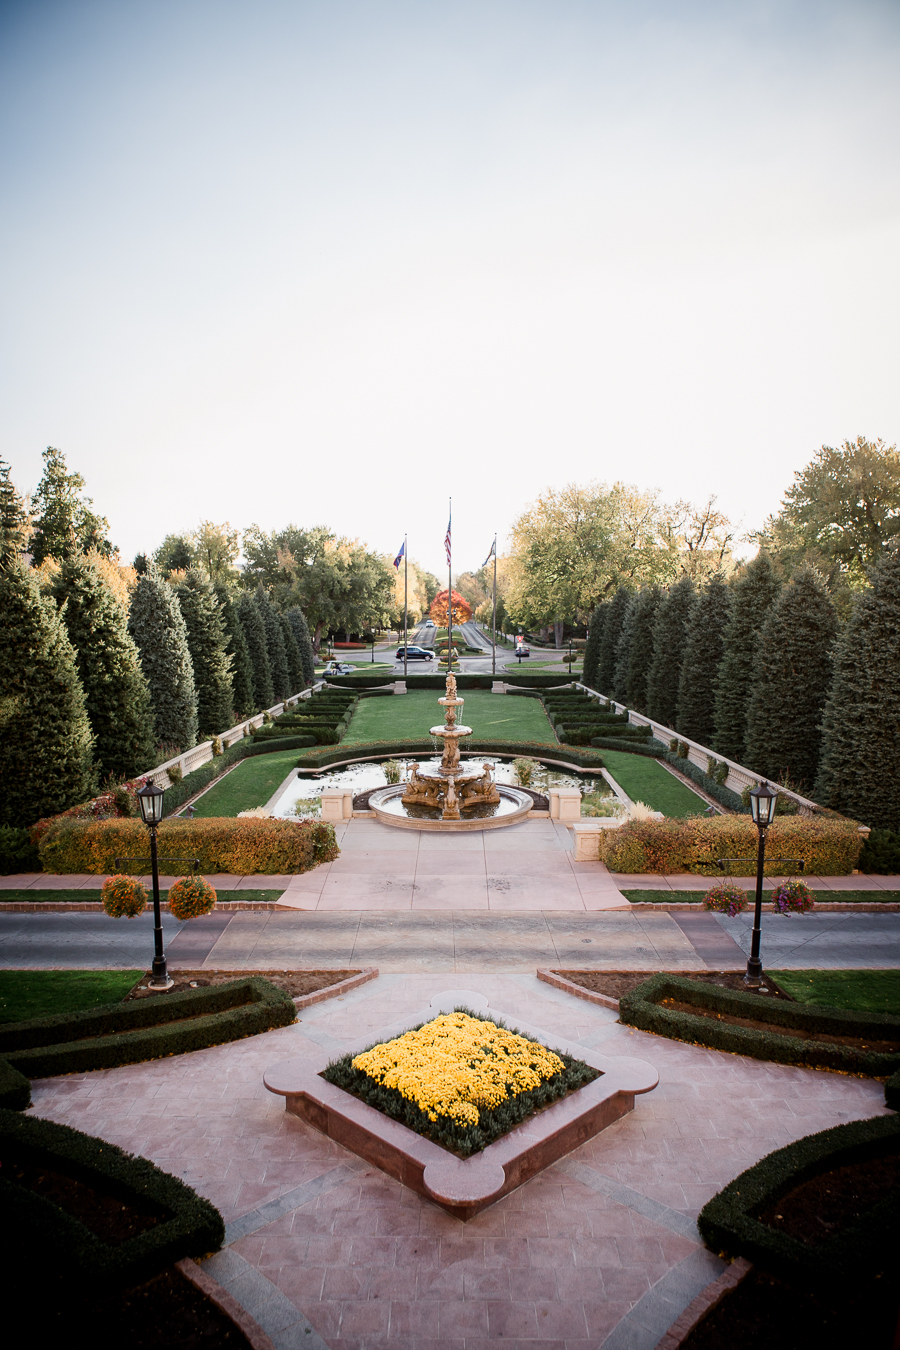 Front entrance gardens at the Broadmoor Resort in Colorado Springs by Knoxville Wedding Photographer, Amanda May Photos.